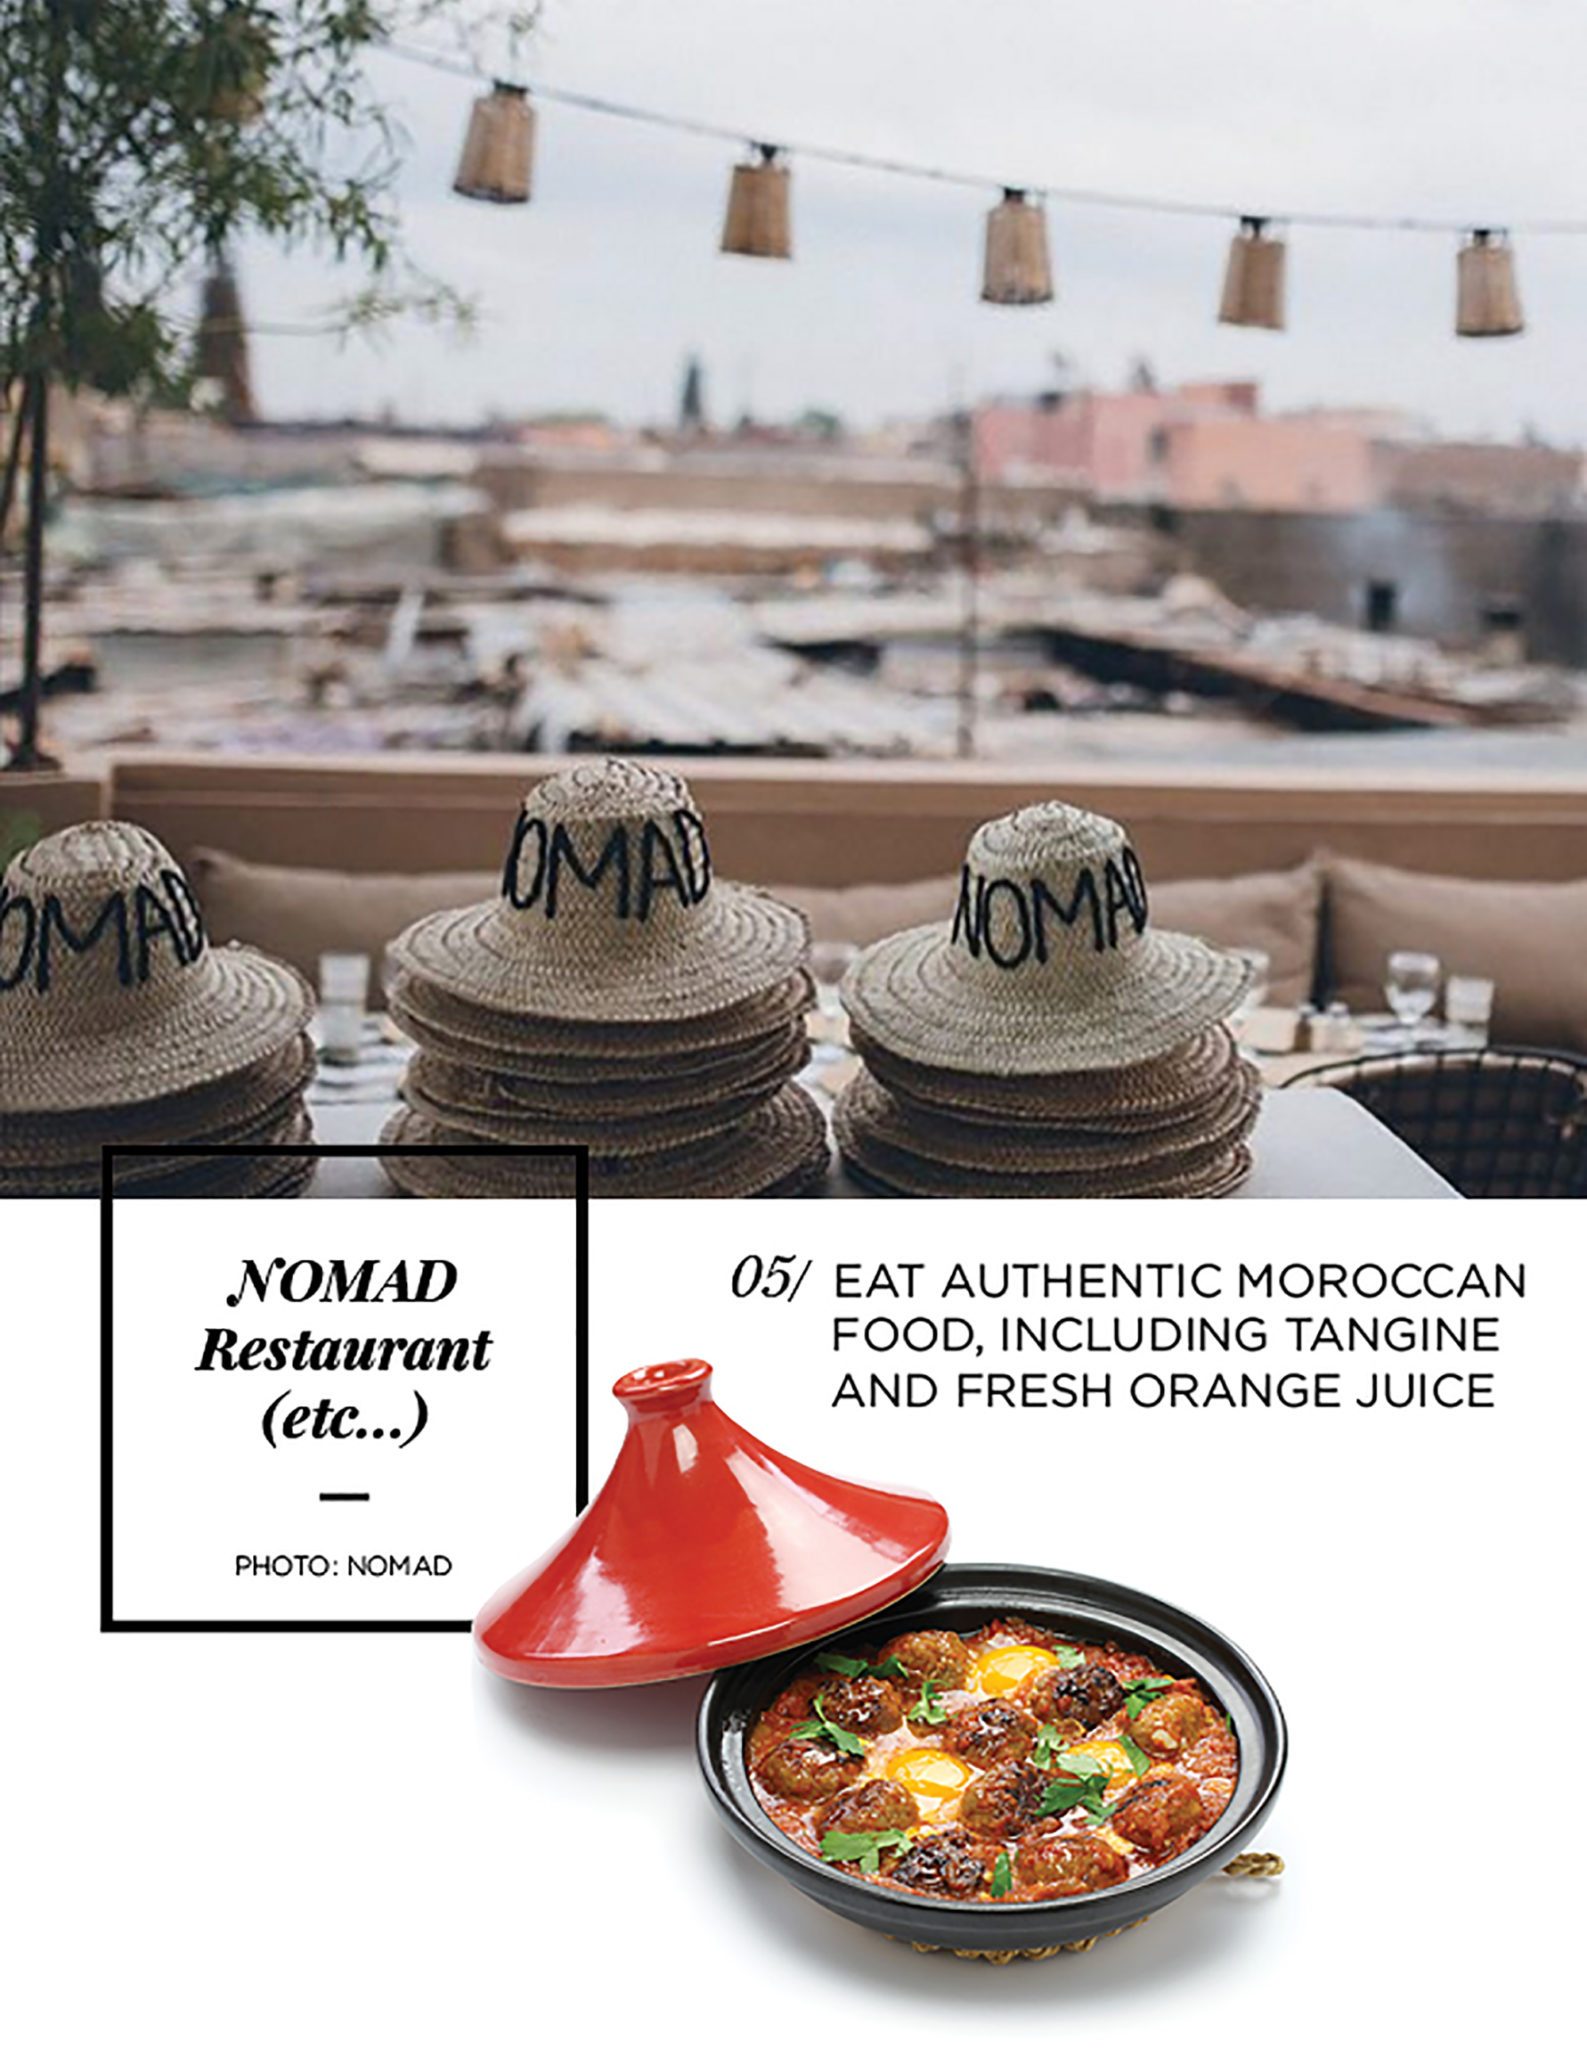 Planning a Trip to Morocco - Food